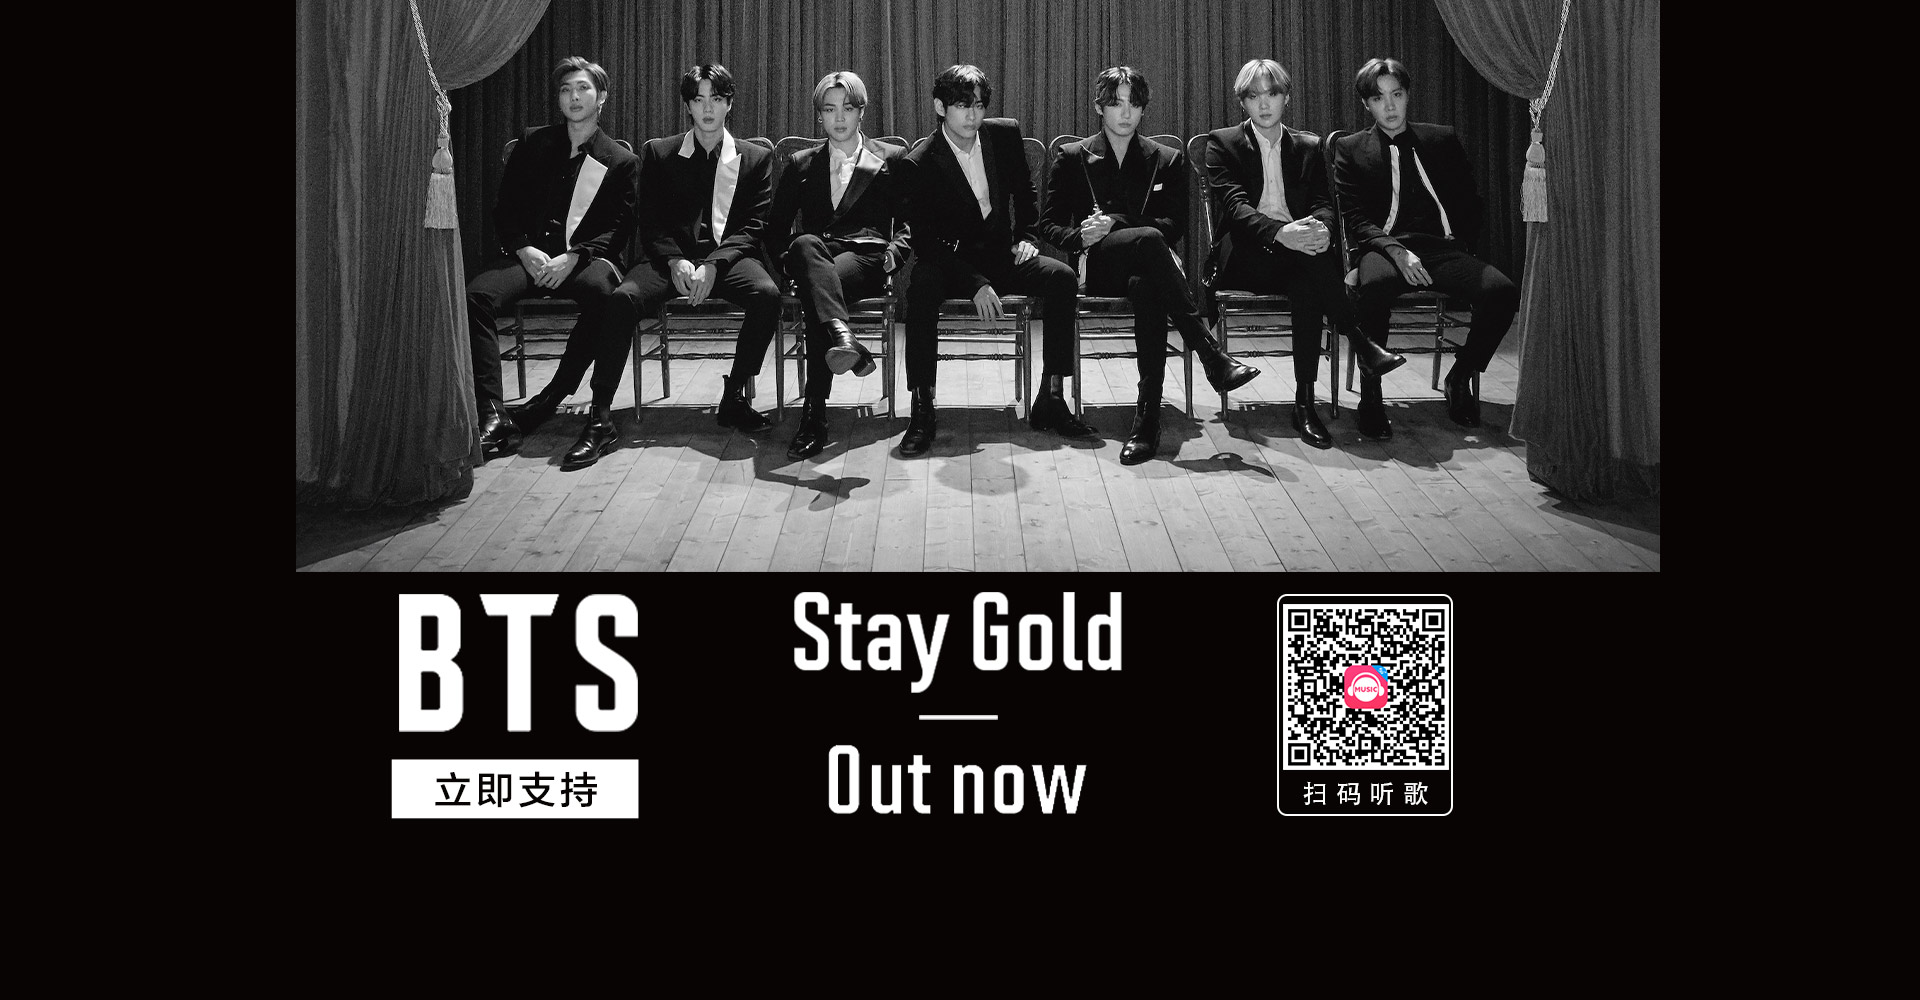 《Stay Gold-Out now》BTS